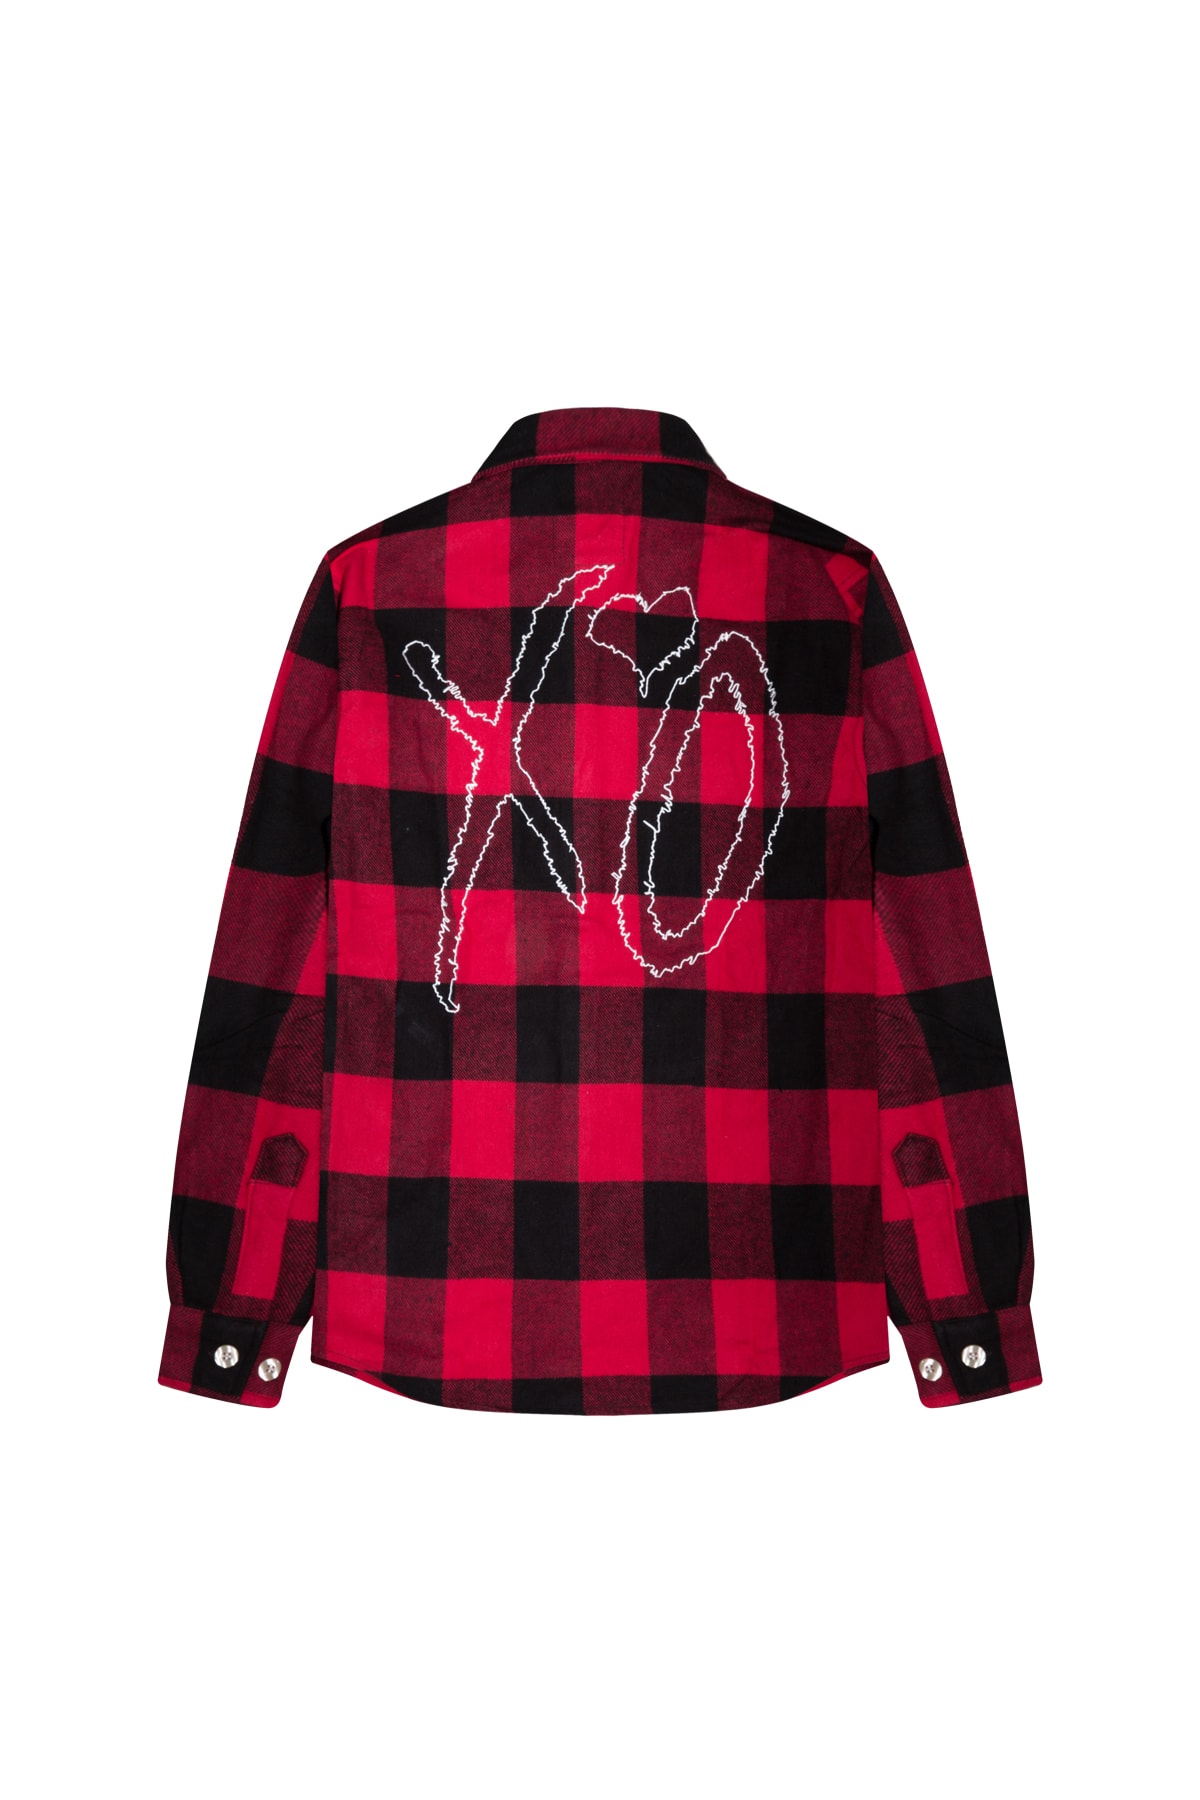 The Weeknd XO Tour Merch Release 004 Classic Logo II Flannel Red Black